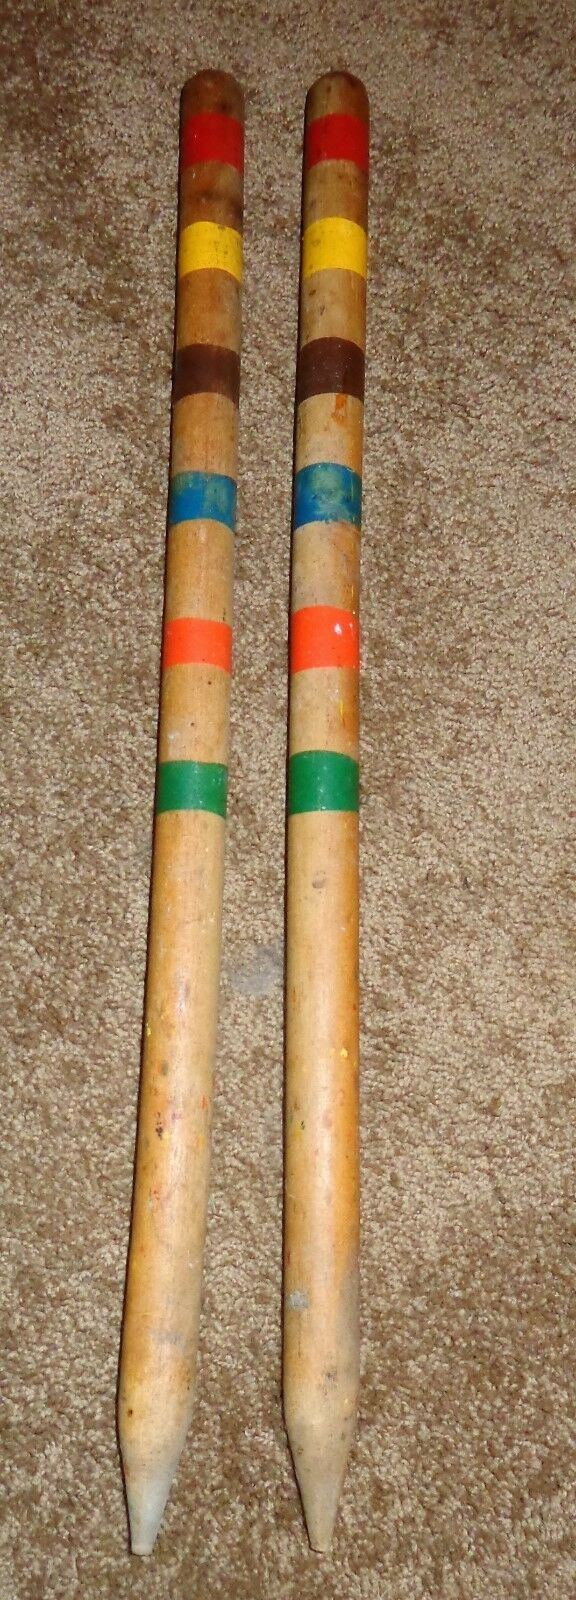 2 OLD VINTAGE WOOD CROQUET SET STAKES WOODEN 20 3/8